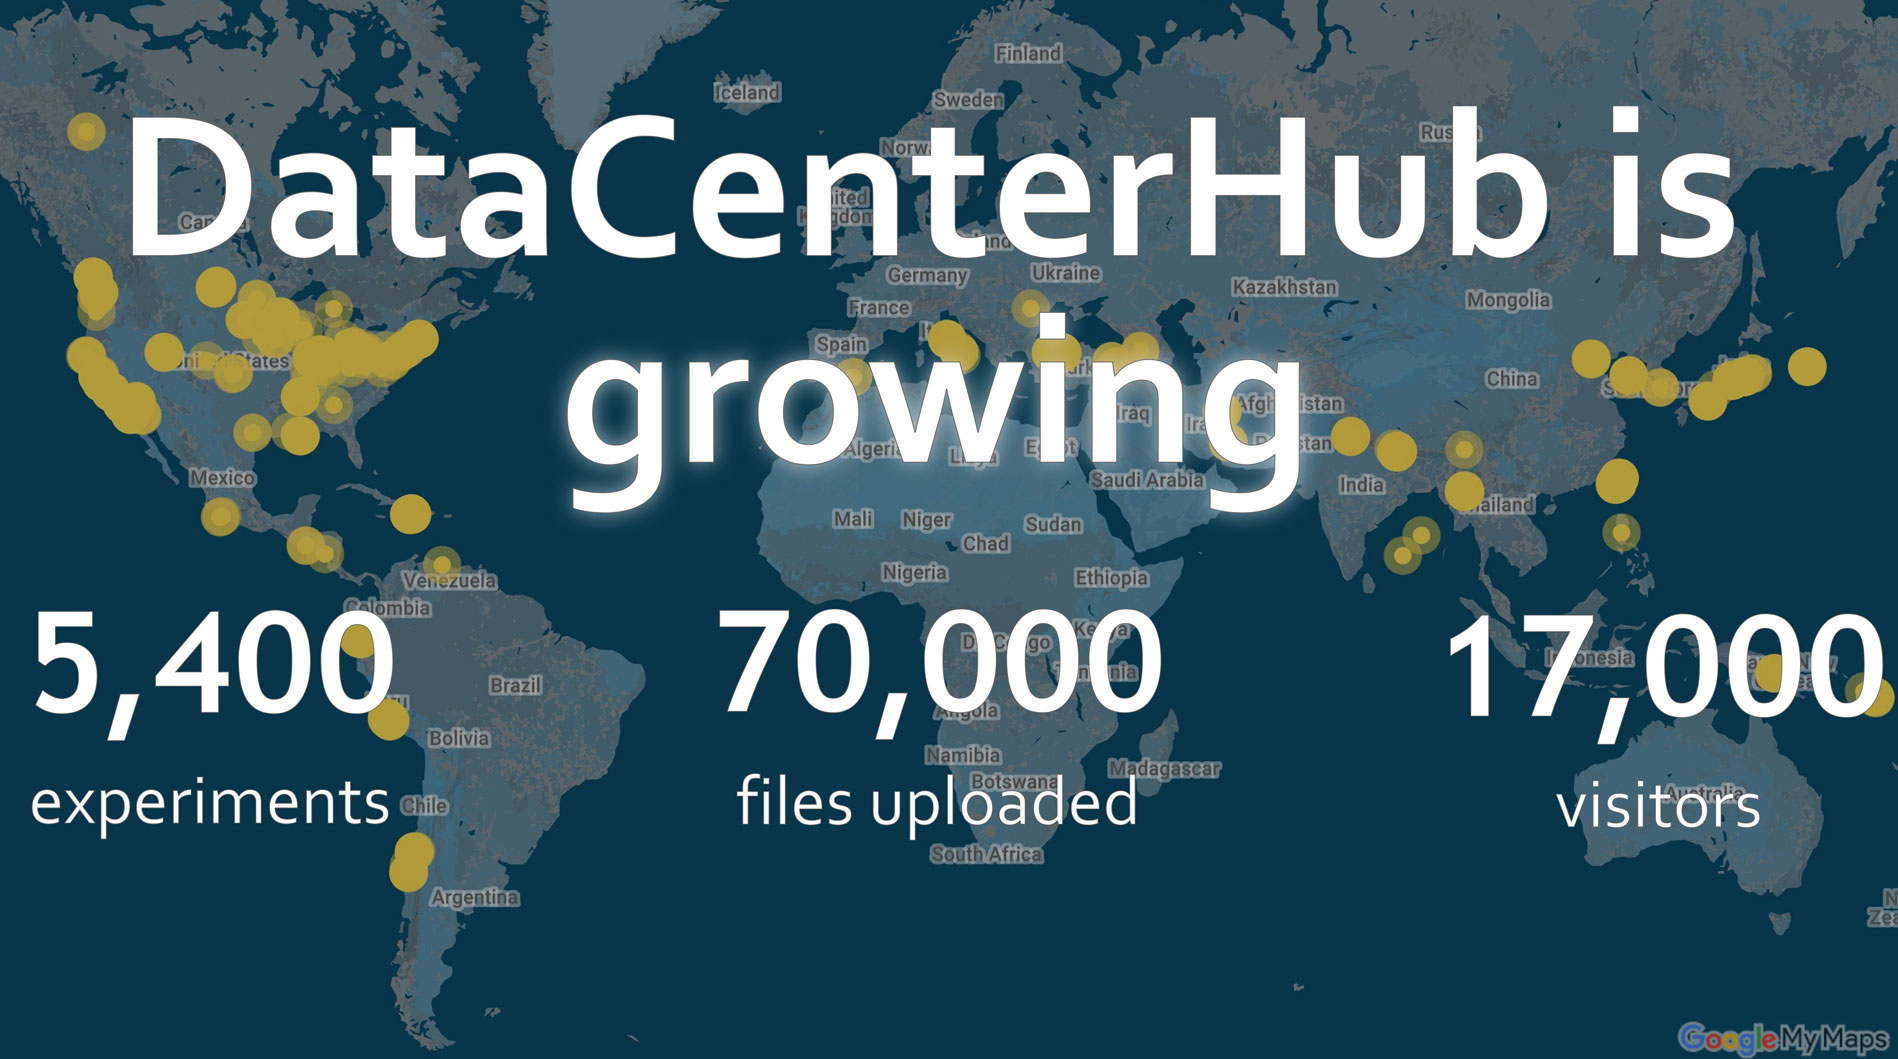 DataCenterHub currently hosts over 30 TB of data, encompassing over 5,400 experiments